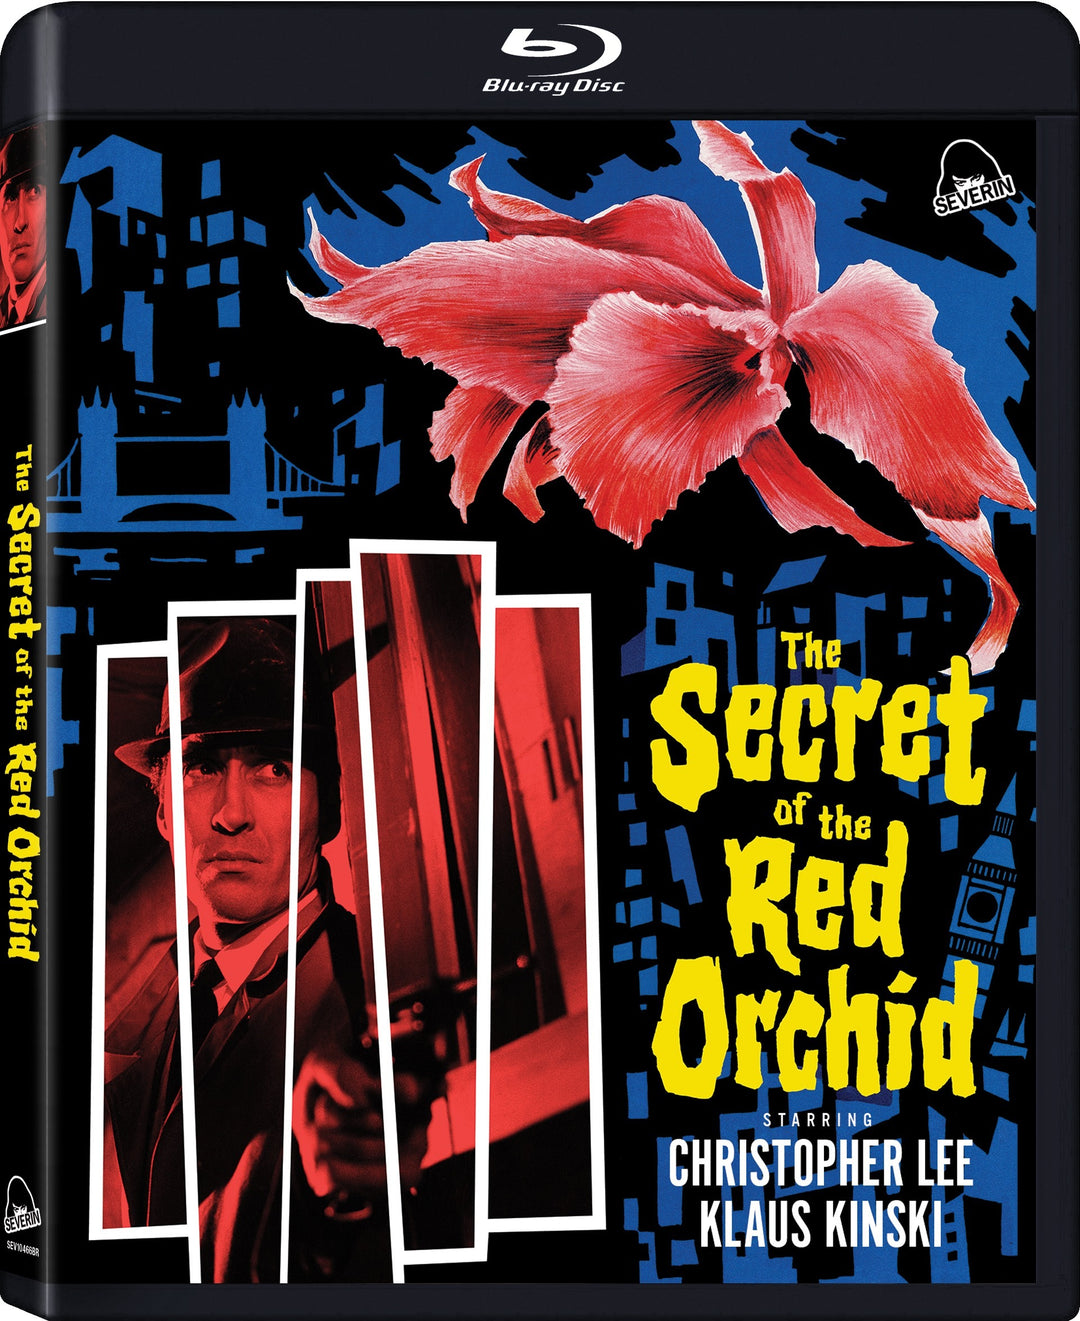 The Eurocrypt of Christopher Lee Collection 2 [7-Disc Blu-ray Box Set]